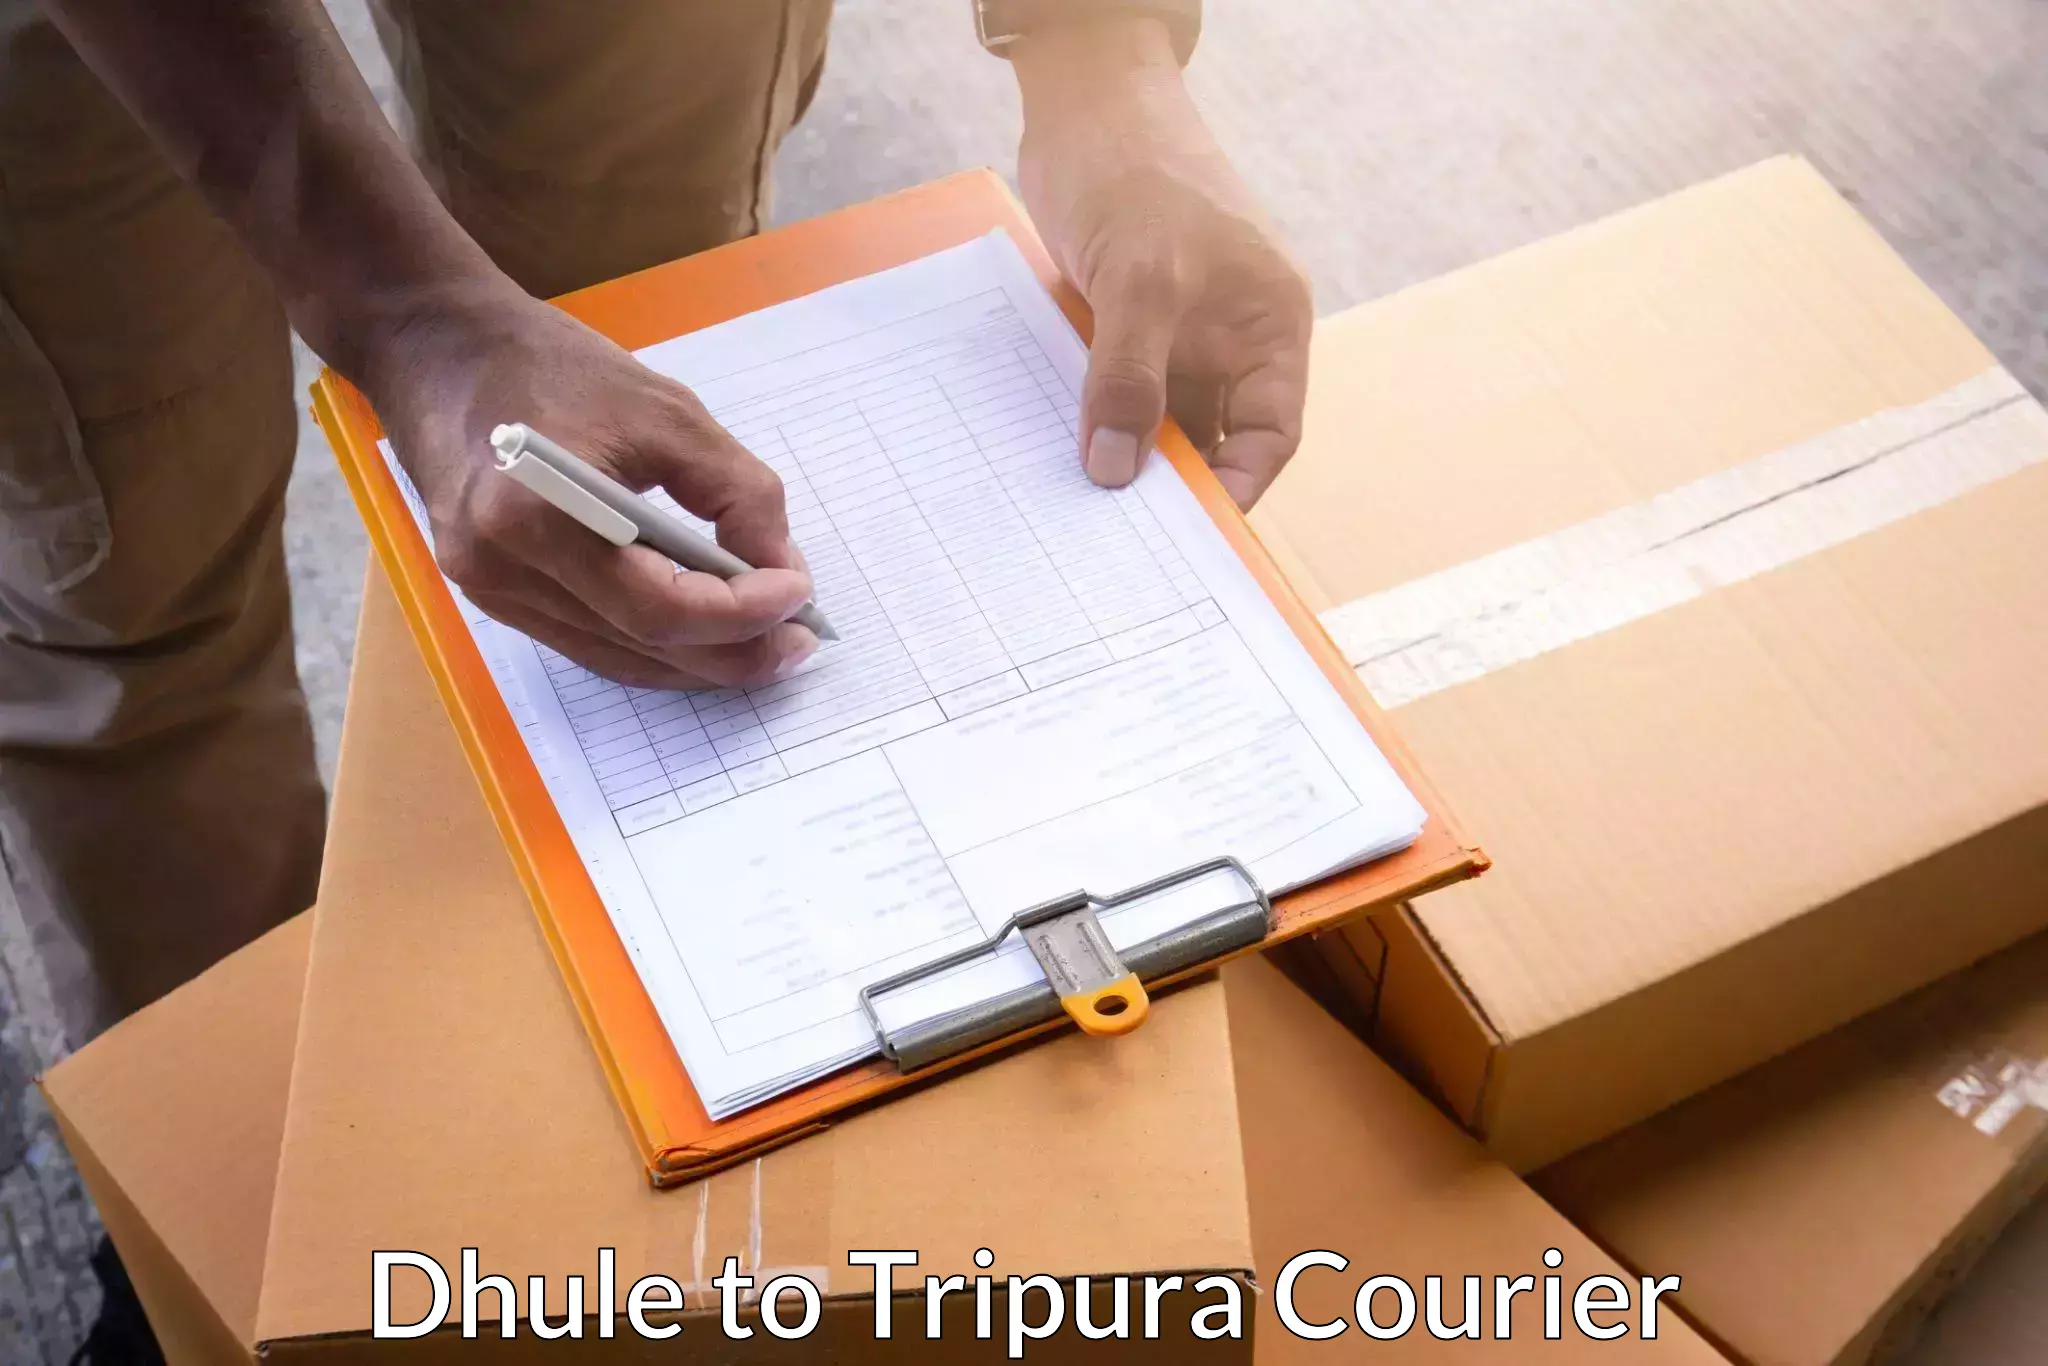 Pharmaceutical courier in Dhule to Udaipur Tripura